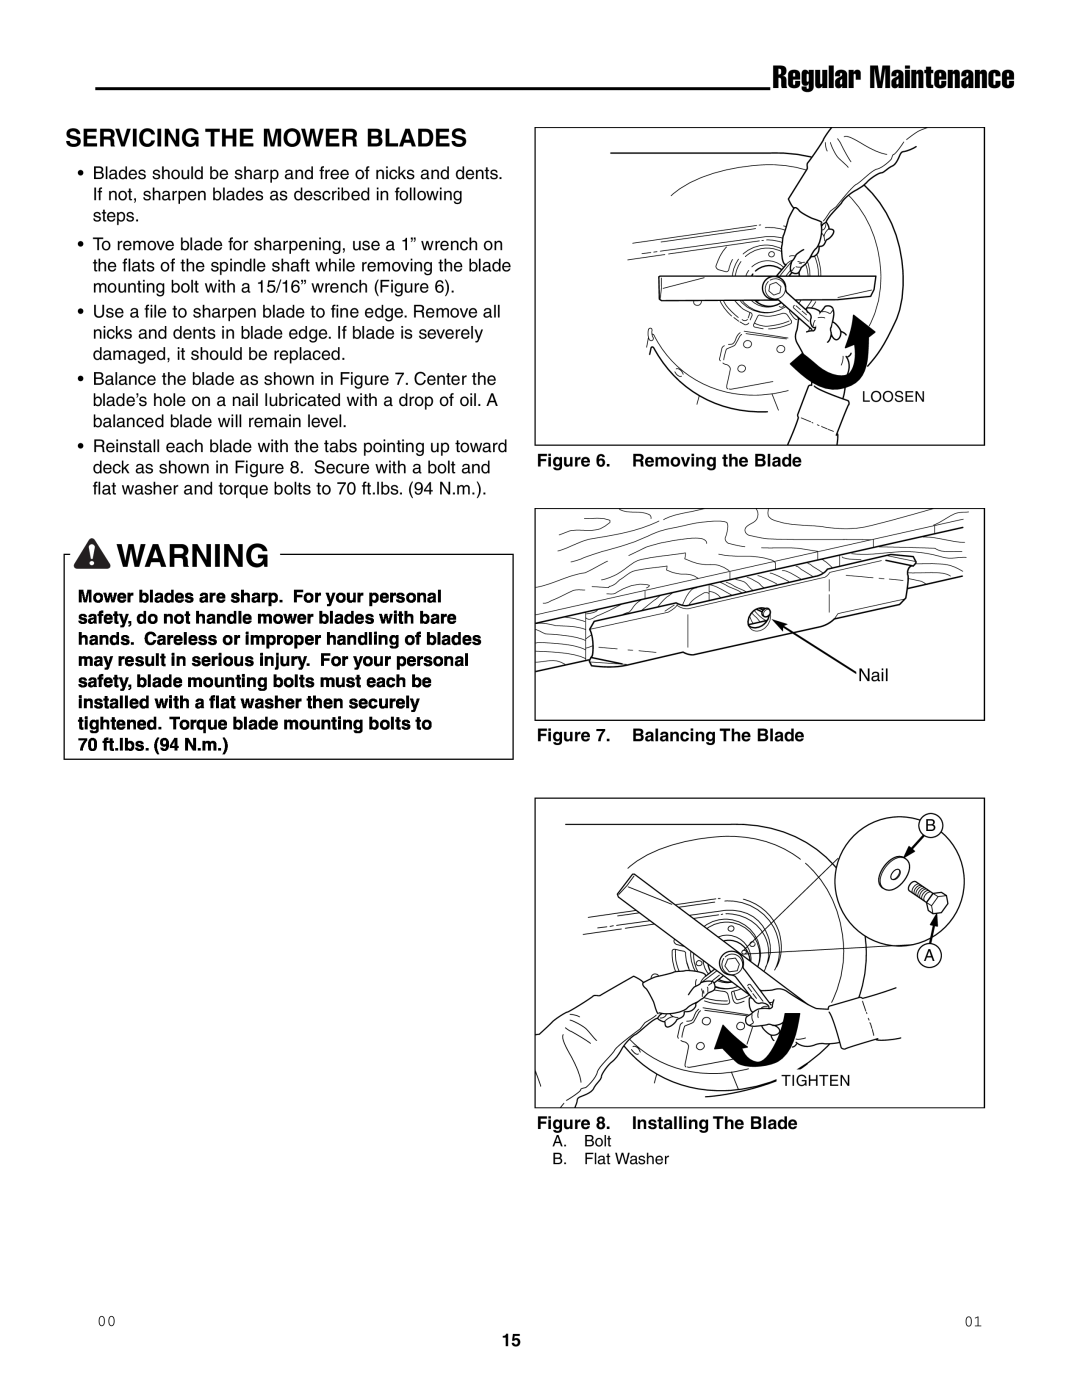 Snapper SFH13320KW important safety instructions Servicing The Mower Blades, Regular Maintenance 